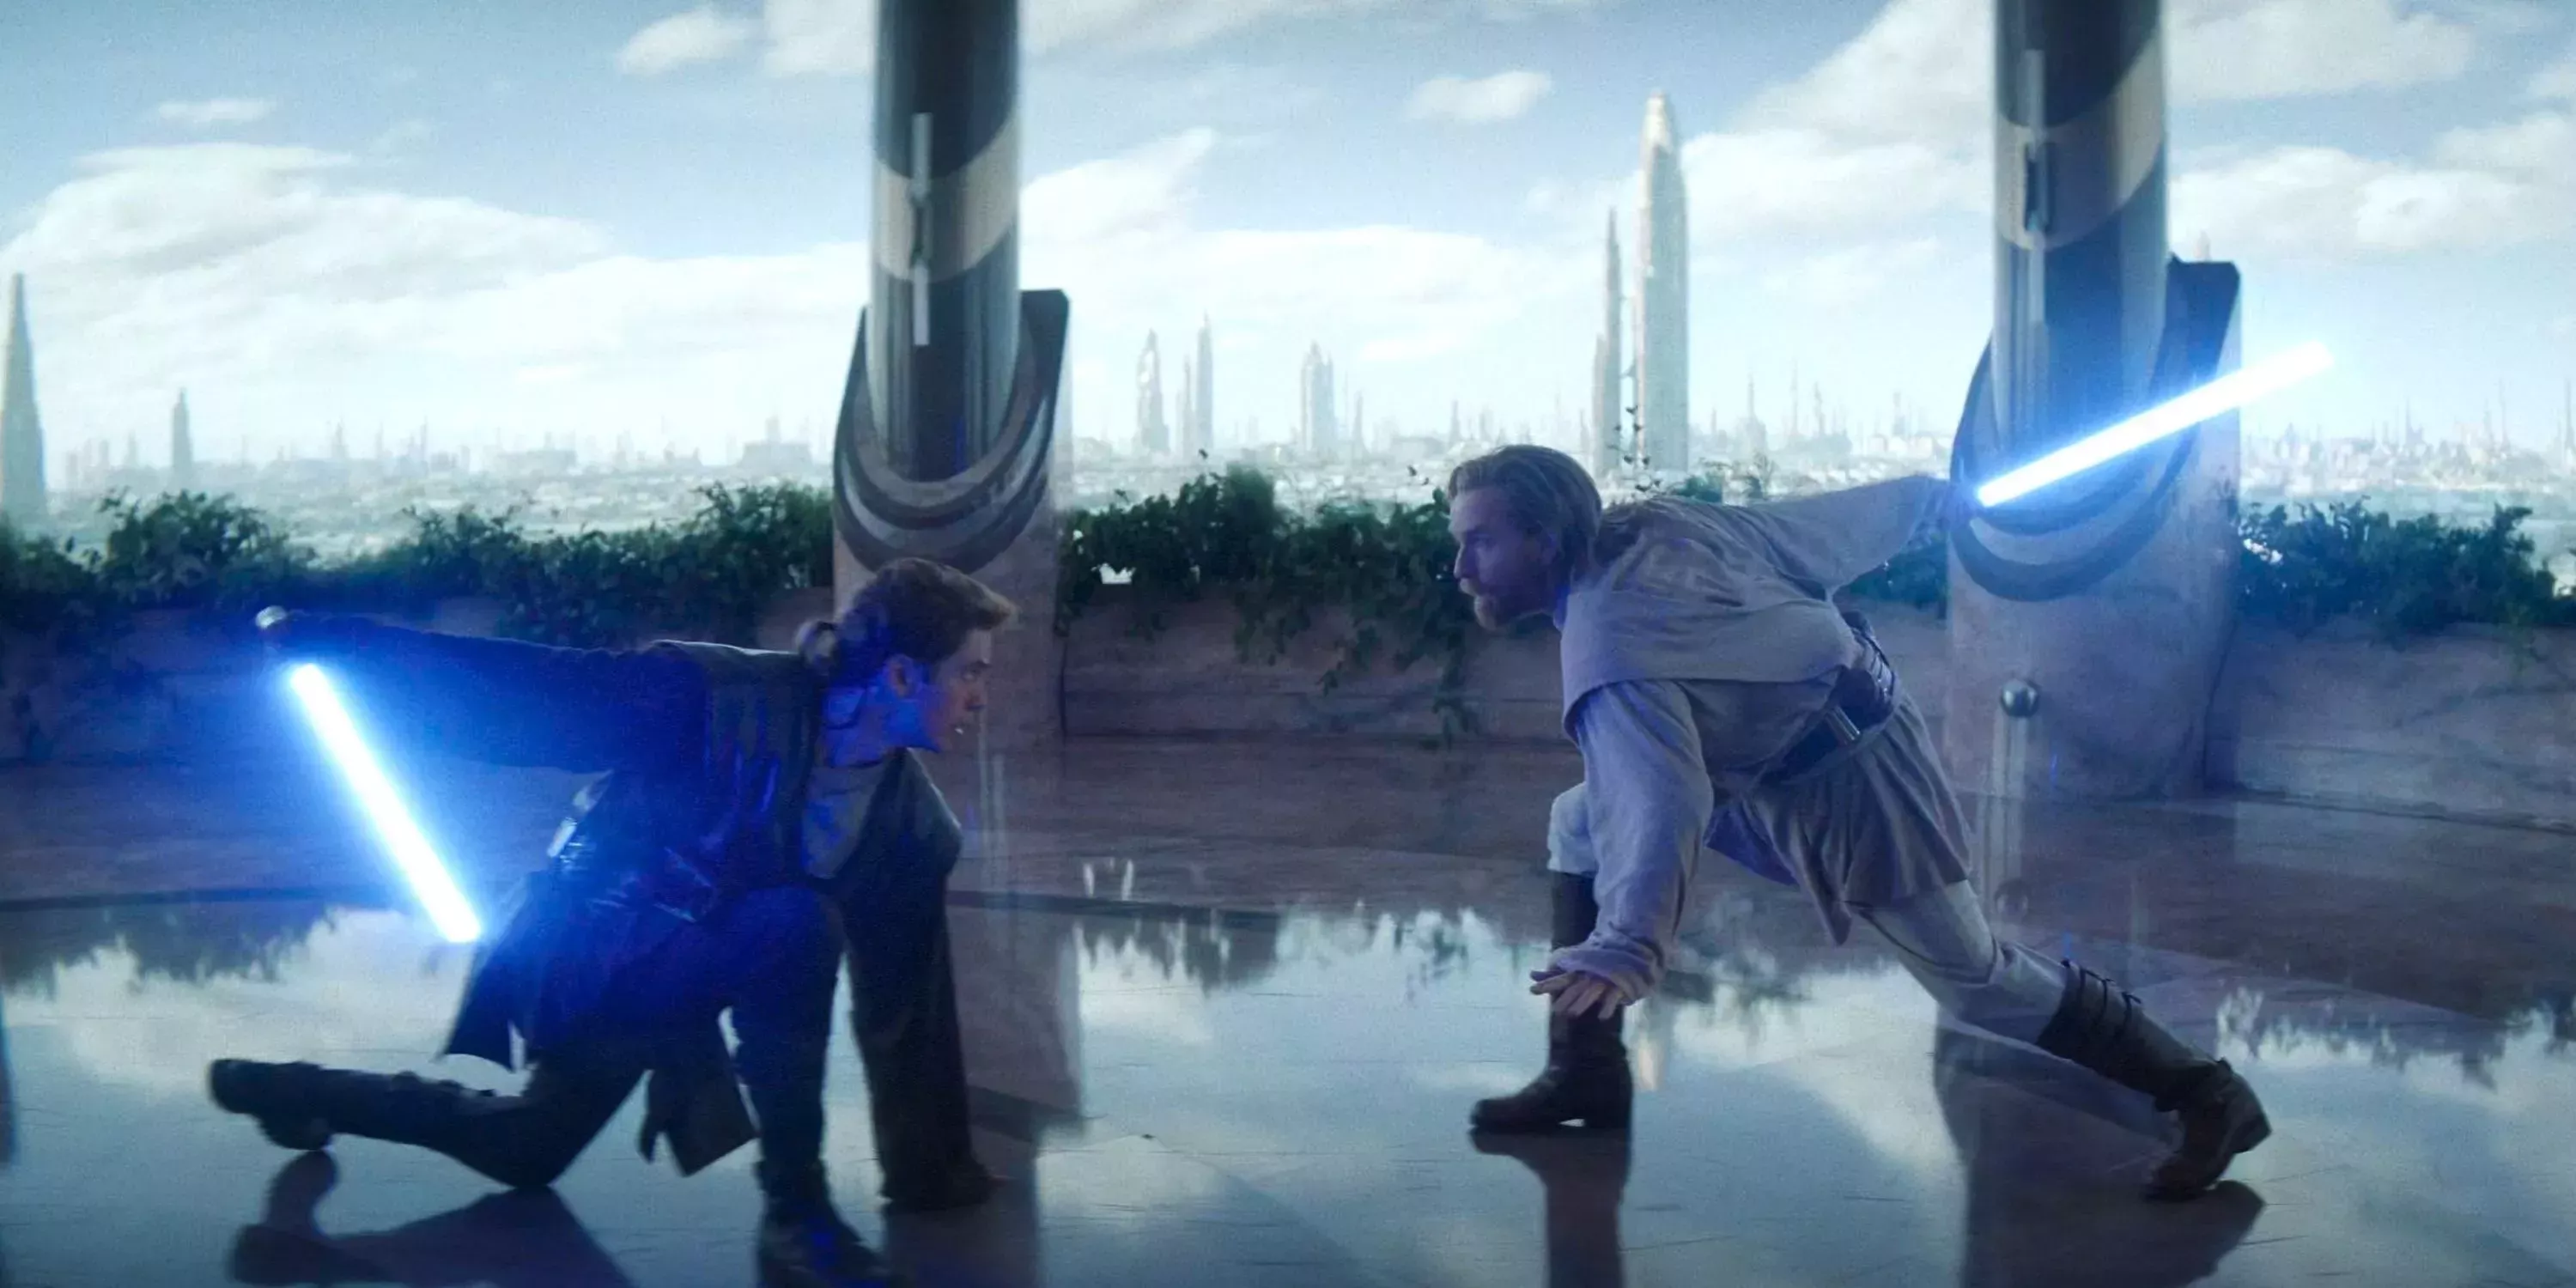 Anakin and Obi-Wan in the middle of a training duel in the Jedi Temple.